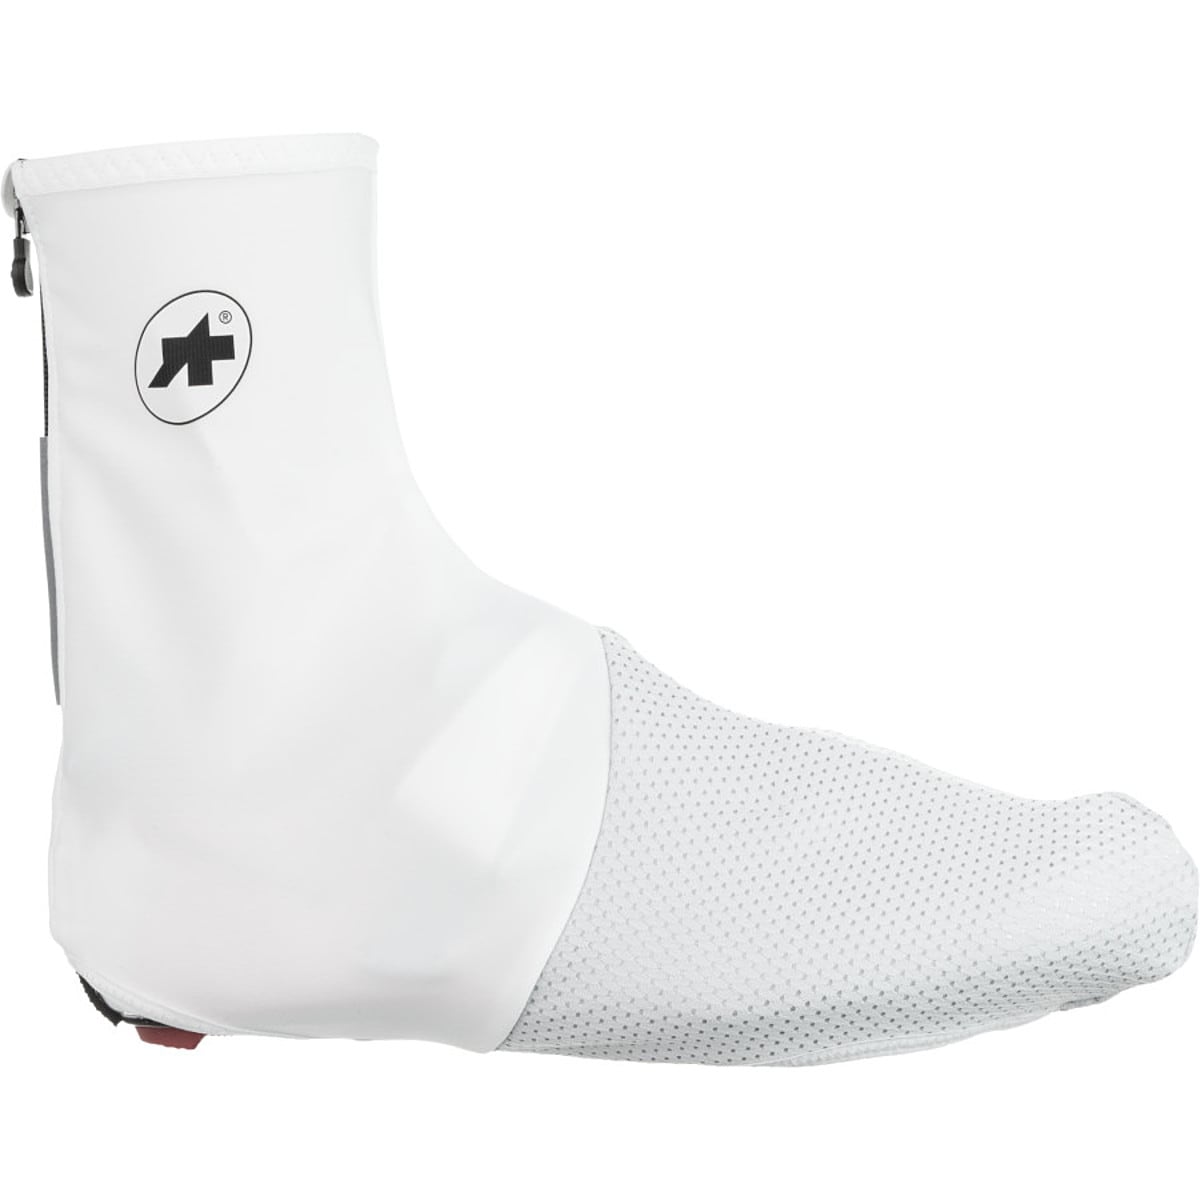 Assos thermobootie.Uno_s7 Shoe Covers